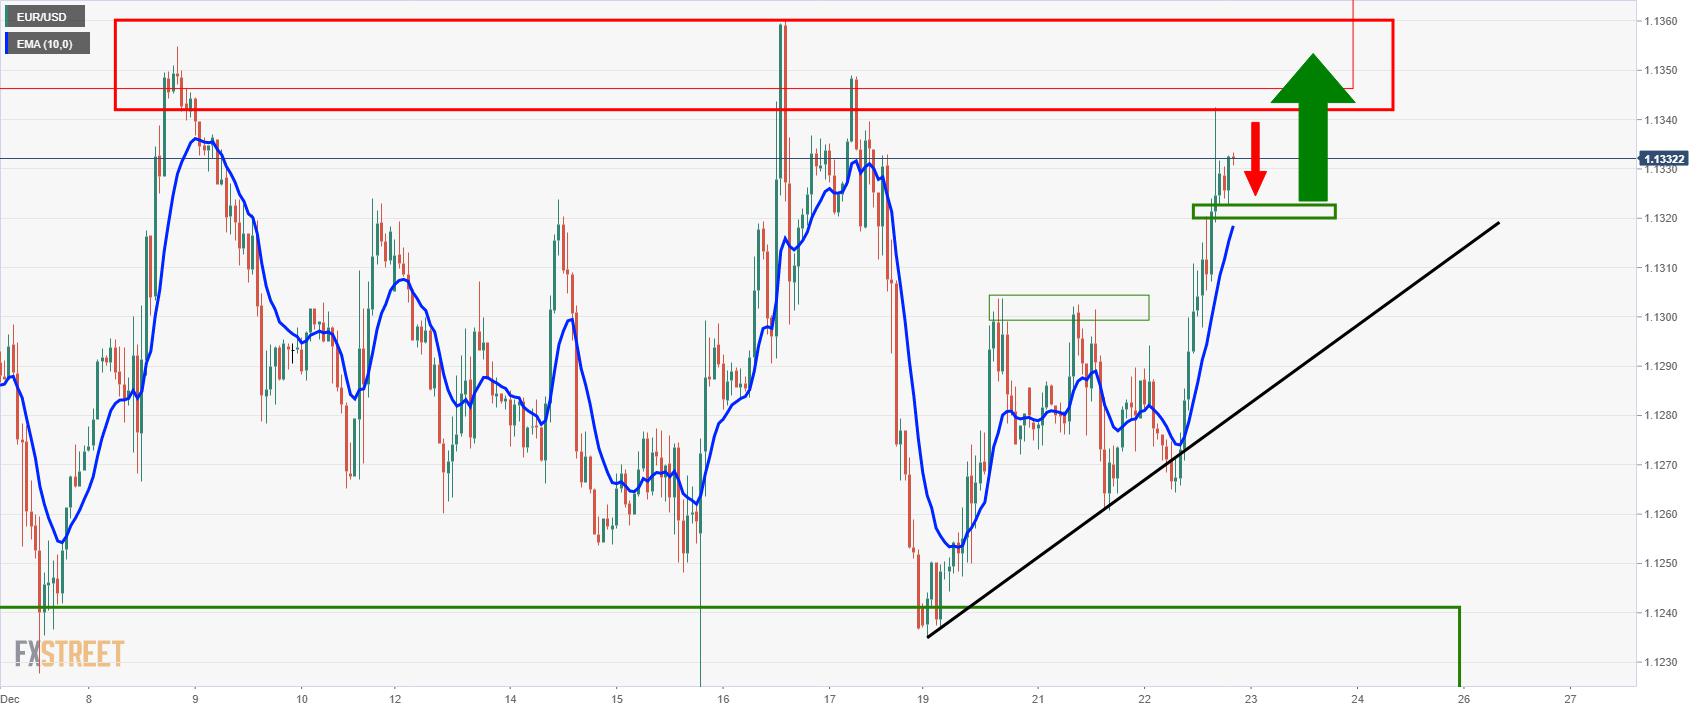 EUR/USD Price Analysis: Bulls moving in on critical daily resistance area